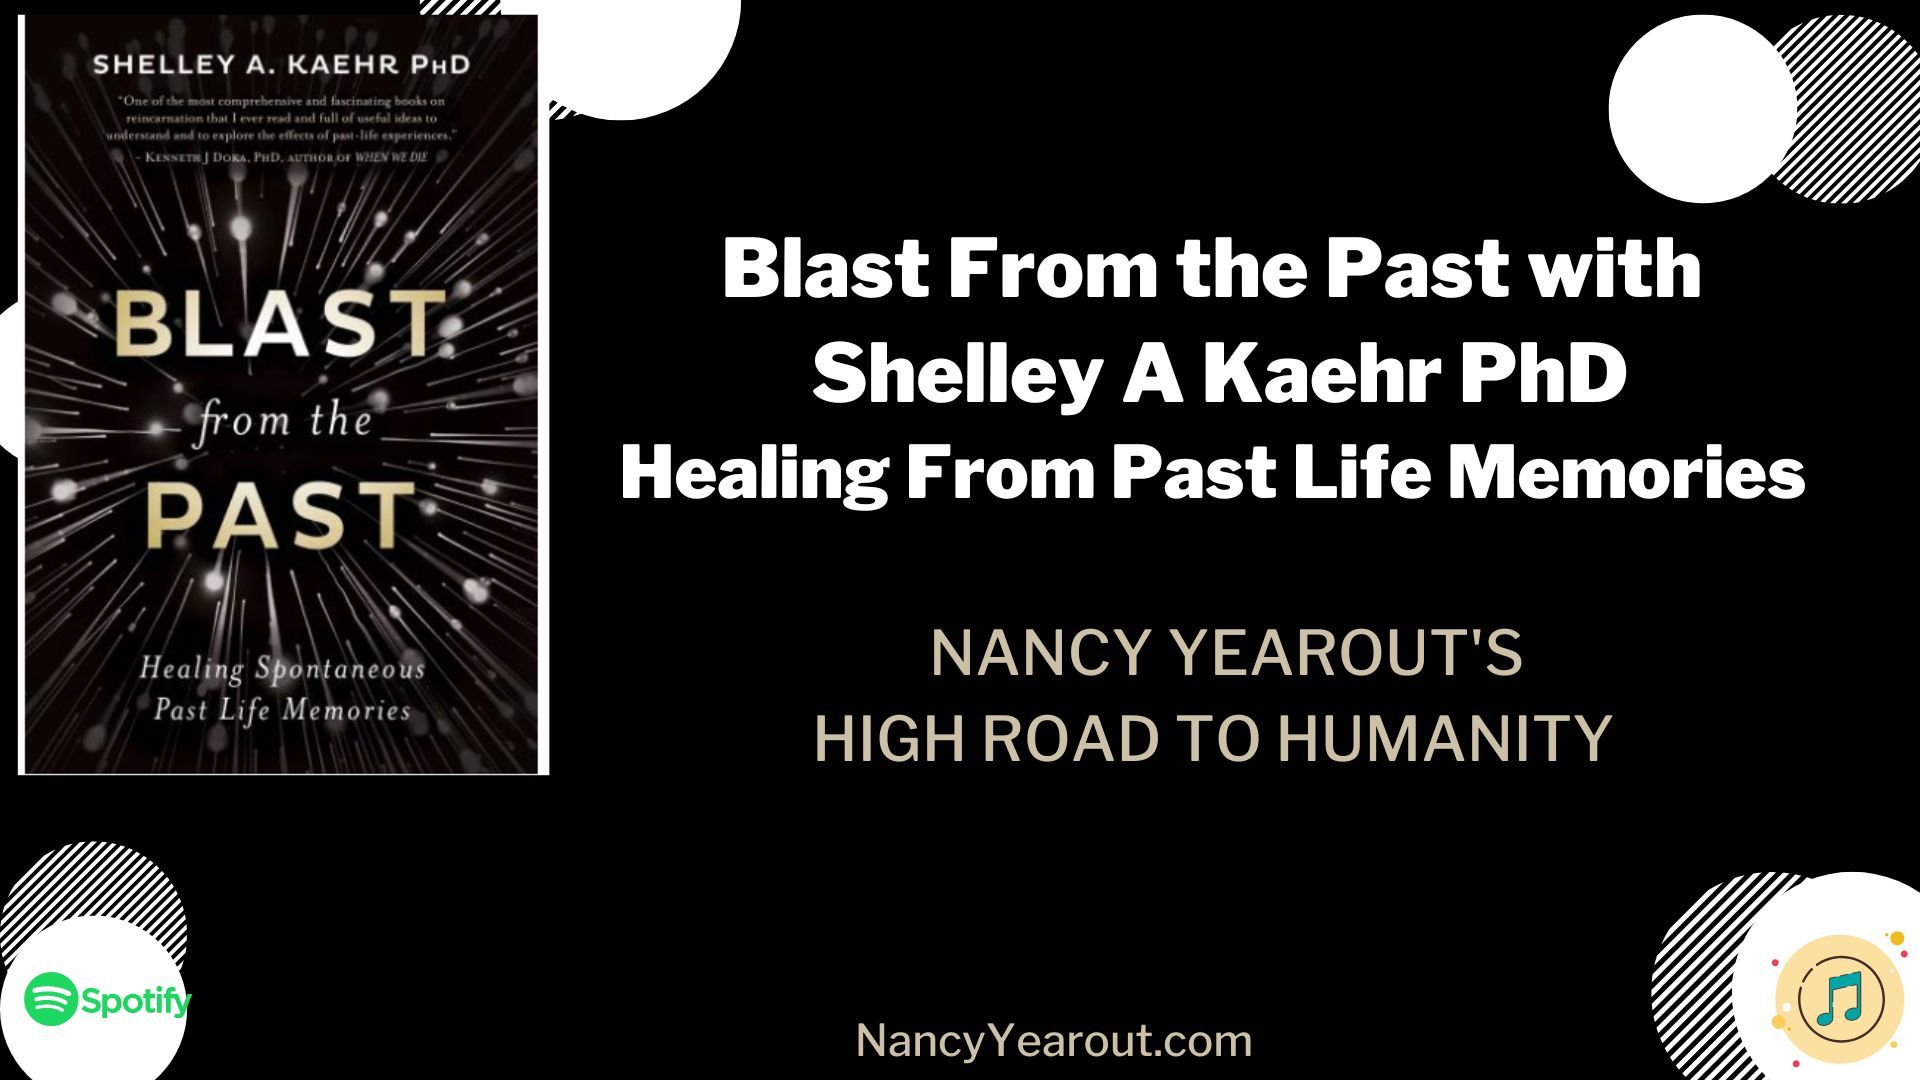 Blast from the Past! Reveal the Healing Found in Spontaneous Past Life Memories By Shelley Kaehr PhD